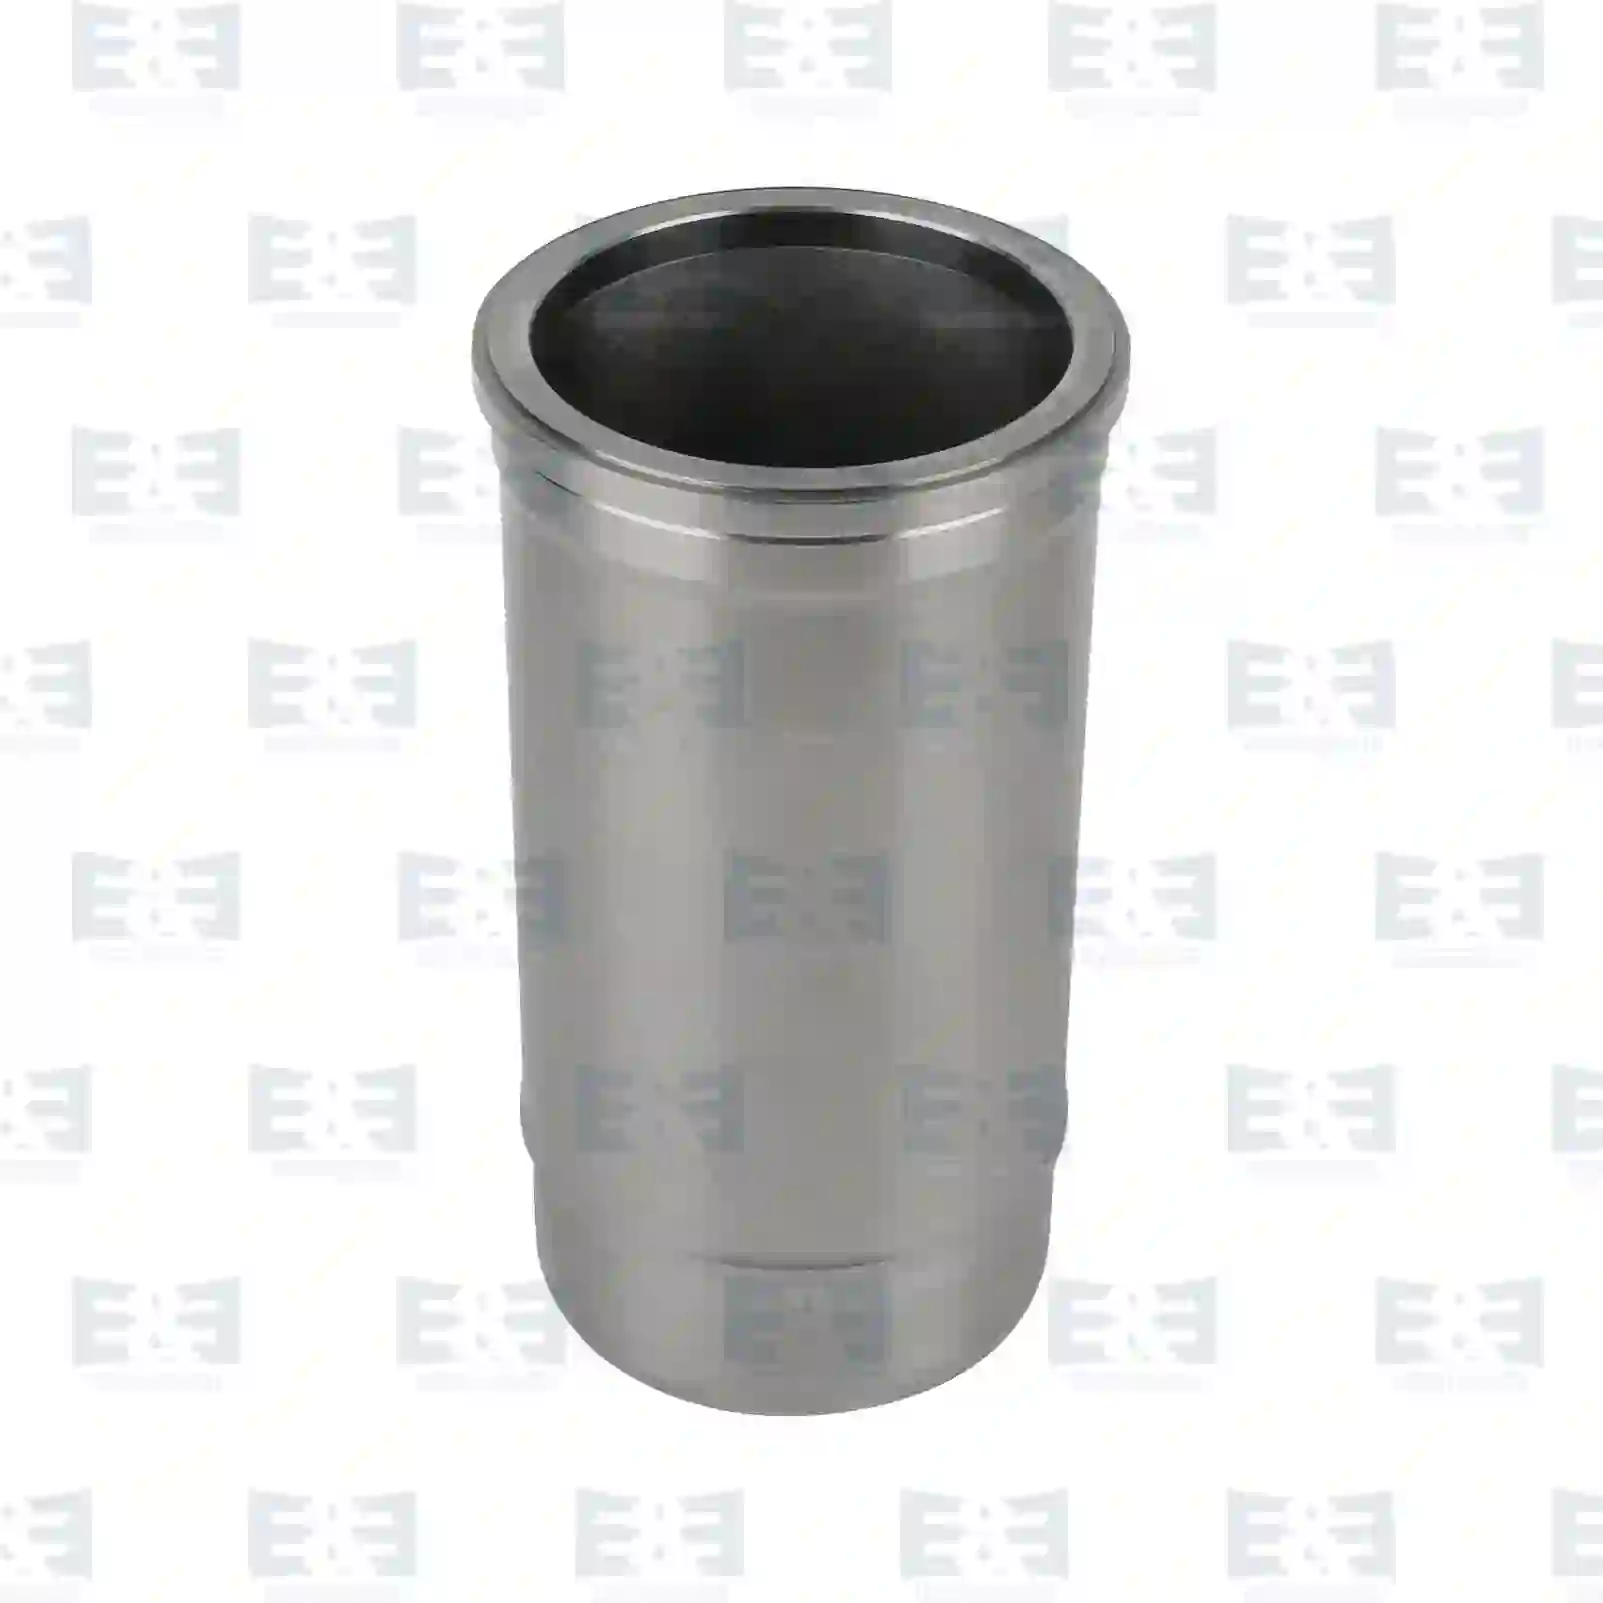 Cylinder liner, without seal rings, 2E2209803, 1344720, , , ||  2E2209803 E&E Truck Spare Parts | Truck Spare Parts, Auotomotive Spare Parts Cylinder liner, without seal rings, 2E2209803, 1344720, , , ||  2E2209803 E&E Truck Spare Parts | Truck Spare Parts, Auotomotive Spare Parts